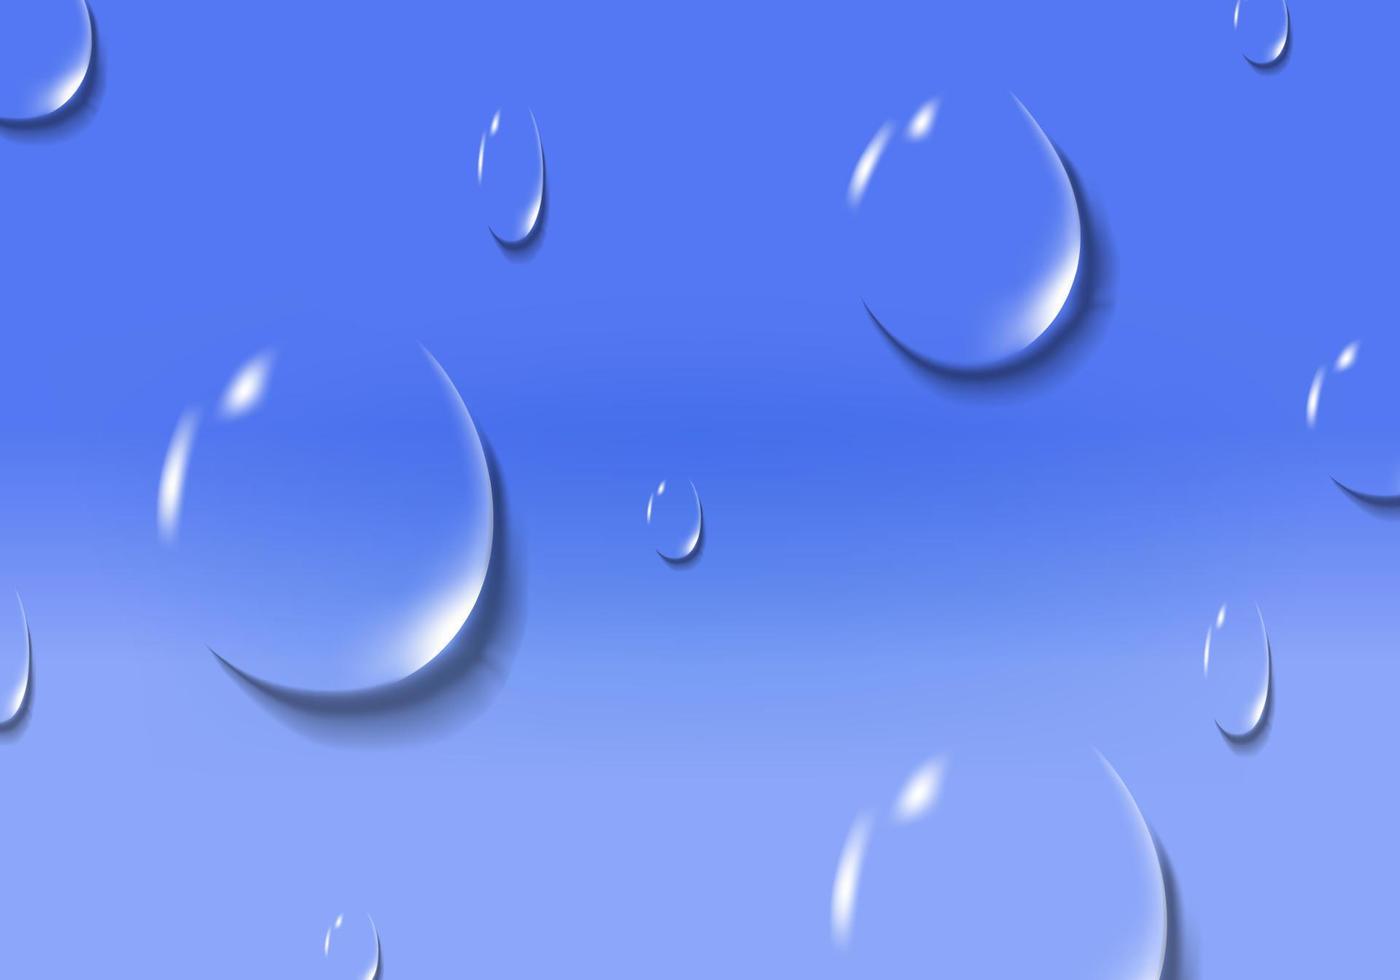 Realistic blue water drops backround vector design